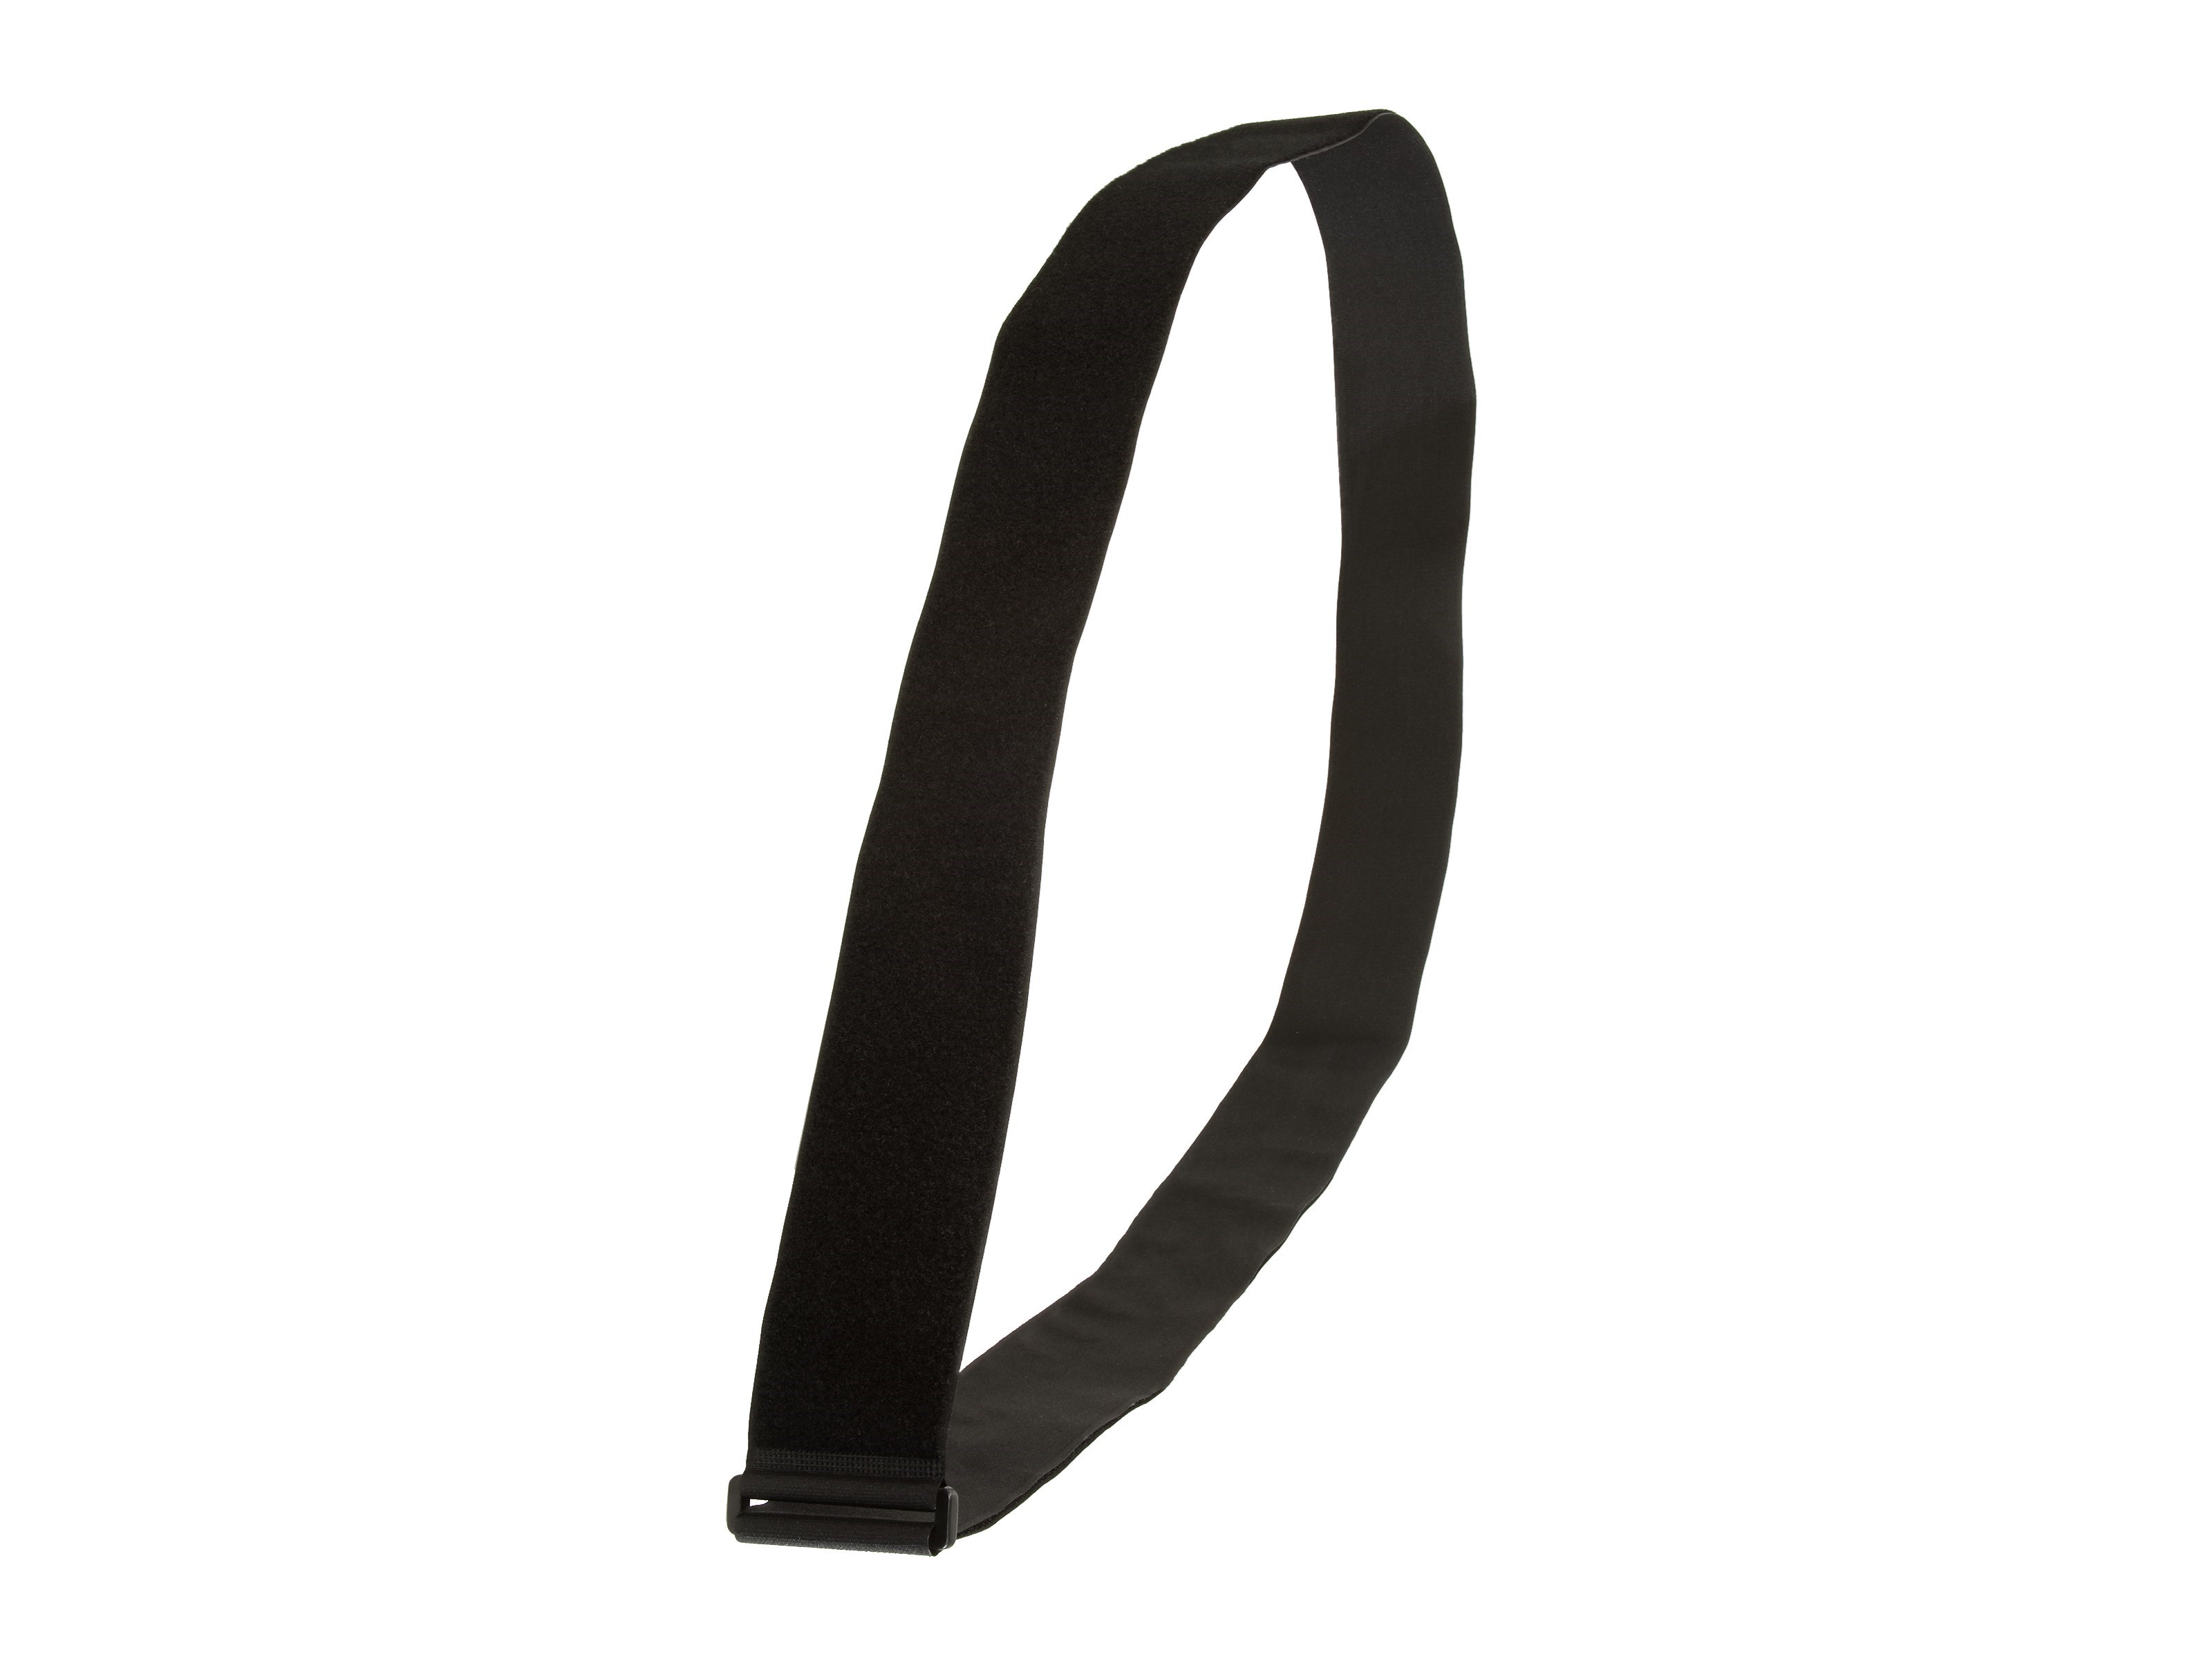 96 x 3 Inch Cinch Straps - 5 Pack - Secure™ Cable Ties